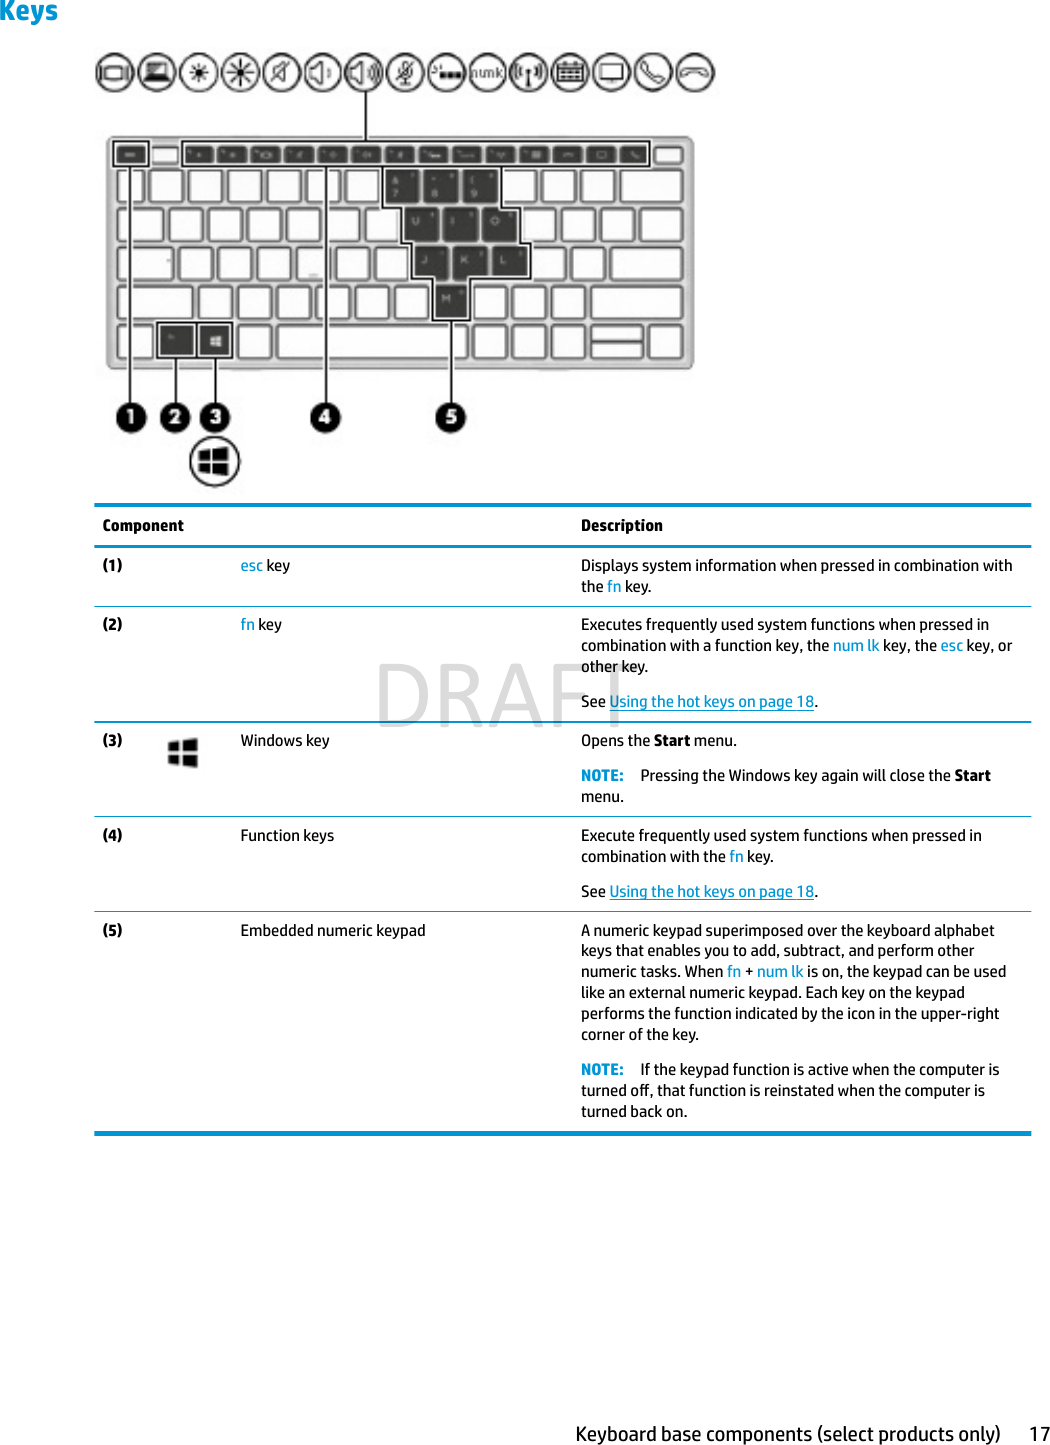 KeysComponent Description(1)  esc key Displays system information when pressed in combination with the fn key.(2)  fn key Executes frequently used system functions when pressed in combination with a function key, the num lk key, the esc key, or other key.See Using the hot keys on page 18.(3) Windows key  Opens the Start menu.NOTE: Pressing the Windows key again will close the Start menu.(4)   Function keys Execute frequently used system functions when pressed in combination with the fn key.See Using the hot keys on page 18.(5)   Embedded numeric keypad  A numeric keypad superimposed over the keyboard alphabet keys that enables you to add, subtract, and perform other numeric tasks. When fn + num lk is on, the keypad can be used like an external numeric keypad. Each key on the keypad performs the function indicated by the icon in the upper-right corner of the key.NOTE: If the keypad function is active when the computer is turned o, that function is reinstated when the computer is turned back on.Keyboard base components (select products only) 17DRAFT